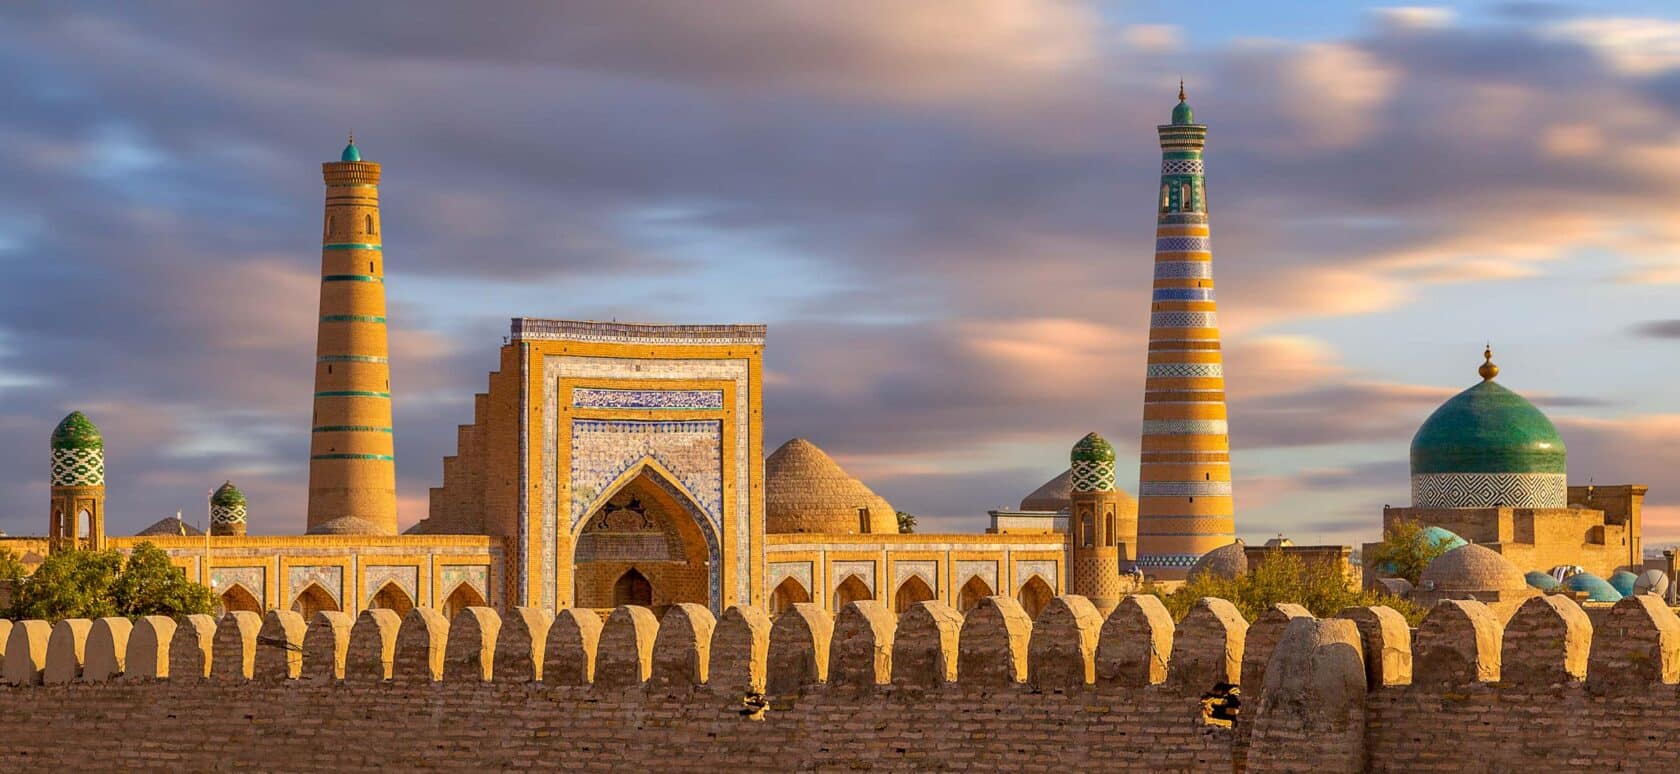 View over the skyline of the ancient city of Khiva, Uzbekistan at sunset.